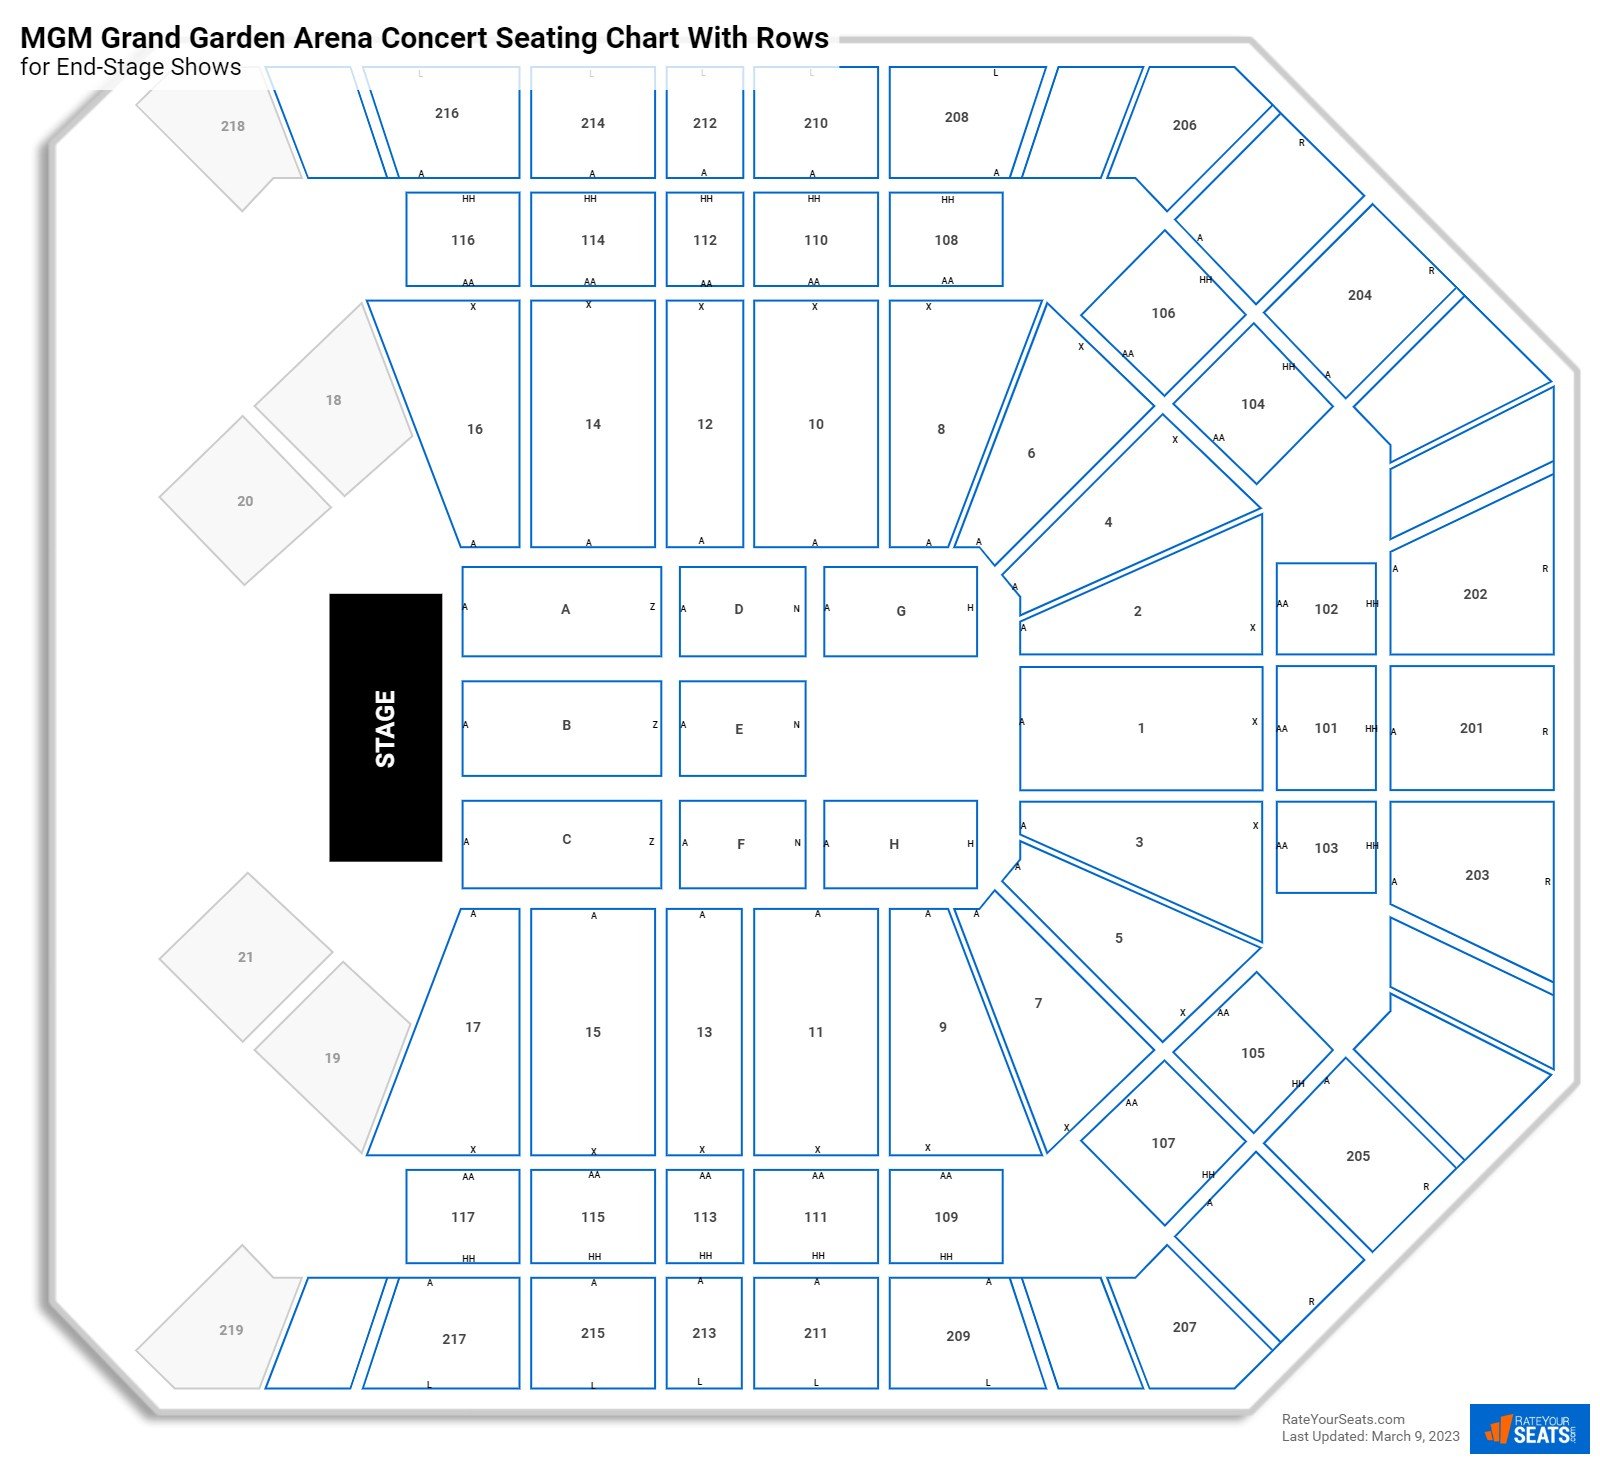 MGM Grand Garden Arena seating chart with row numbers